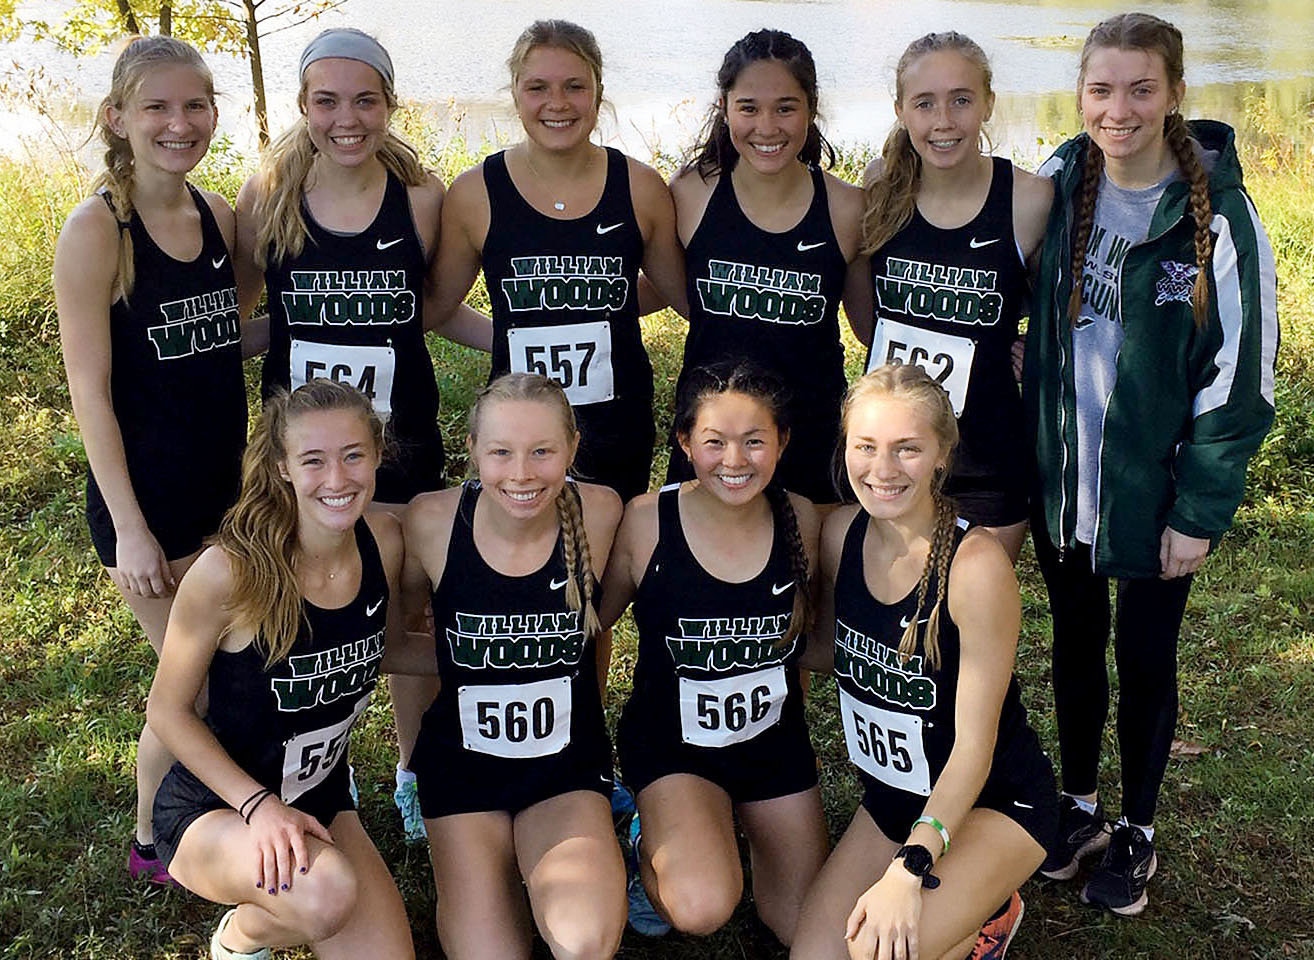 Mekayla Gibson (back row, fifth from left) helped the Wiliam Woods University (WWU) Lady Owls cross country team earn an at-large bid to the National Association of Intercollegiate Athletics (NAIA) National Meet this Friday in Vancouver, Wash. Gibson is also pictured below competing at one of her meets during her freshman season in Fulton.